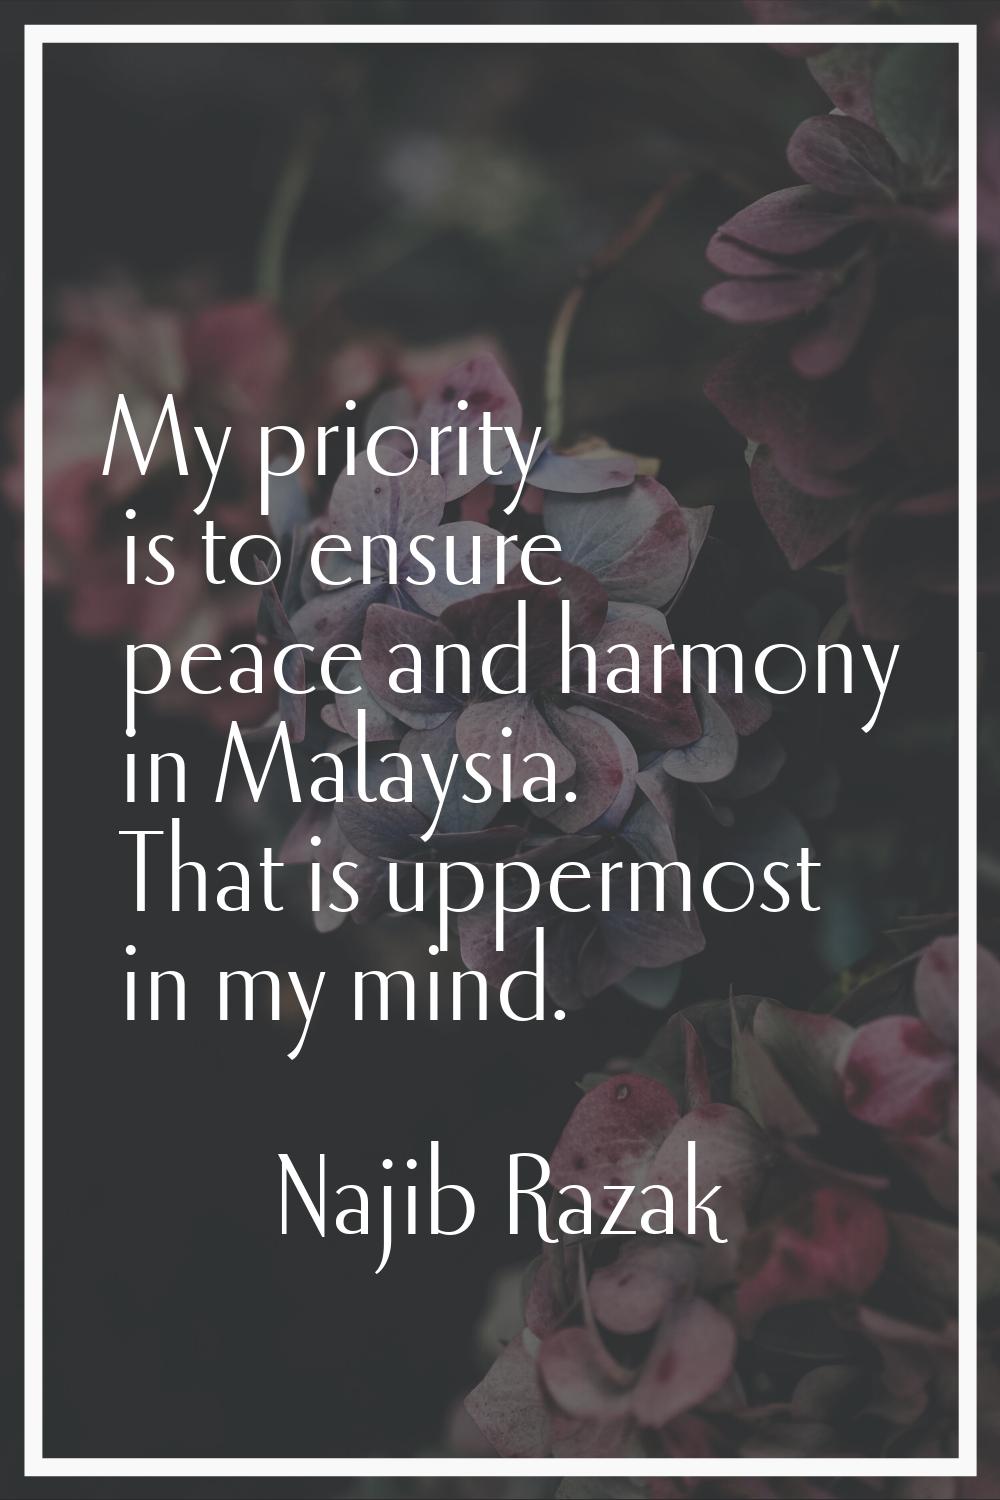 My priority is to ensure peace and harmony in Malaysia. That is uppermost in my mind.